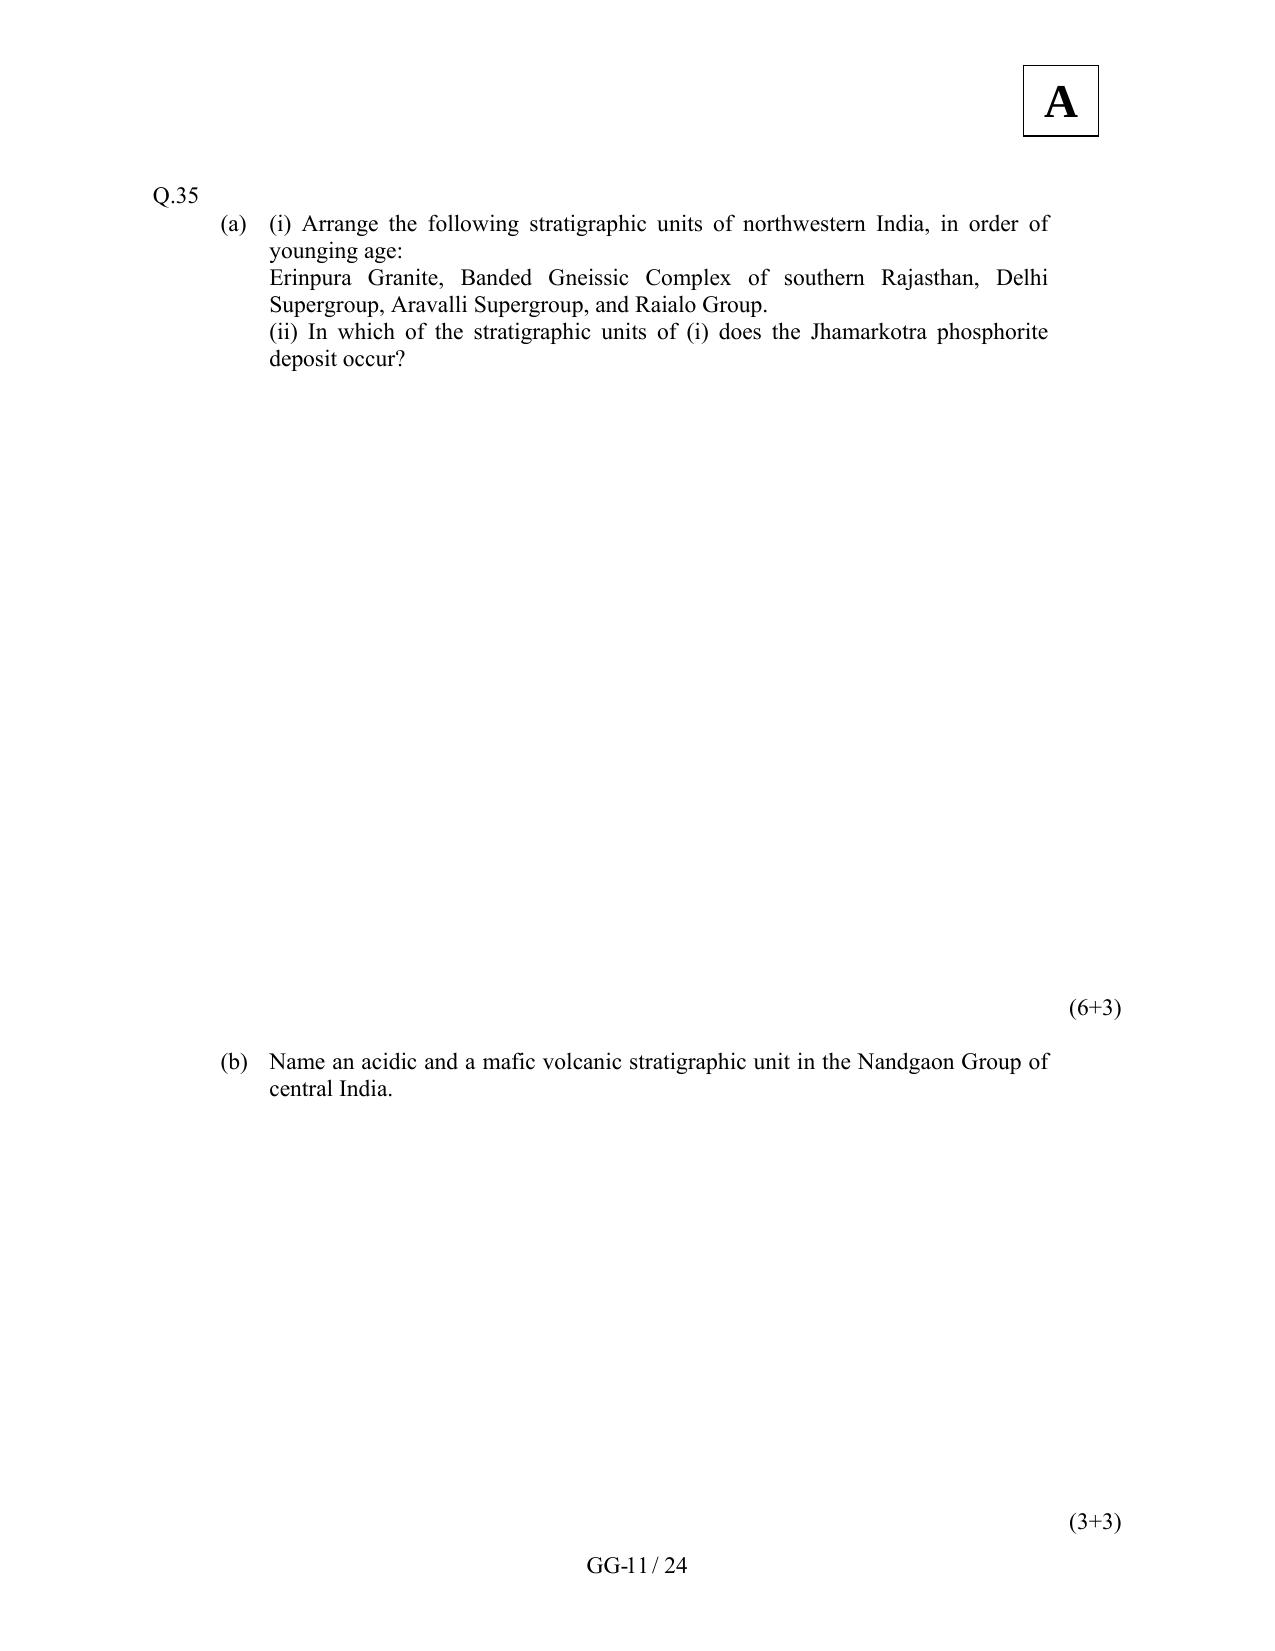 JAM 2012: GG Question Paper - Page 13